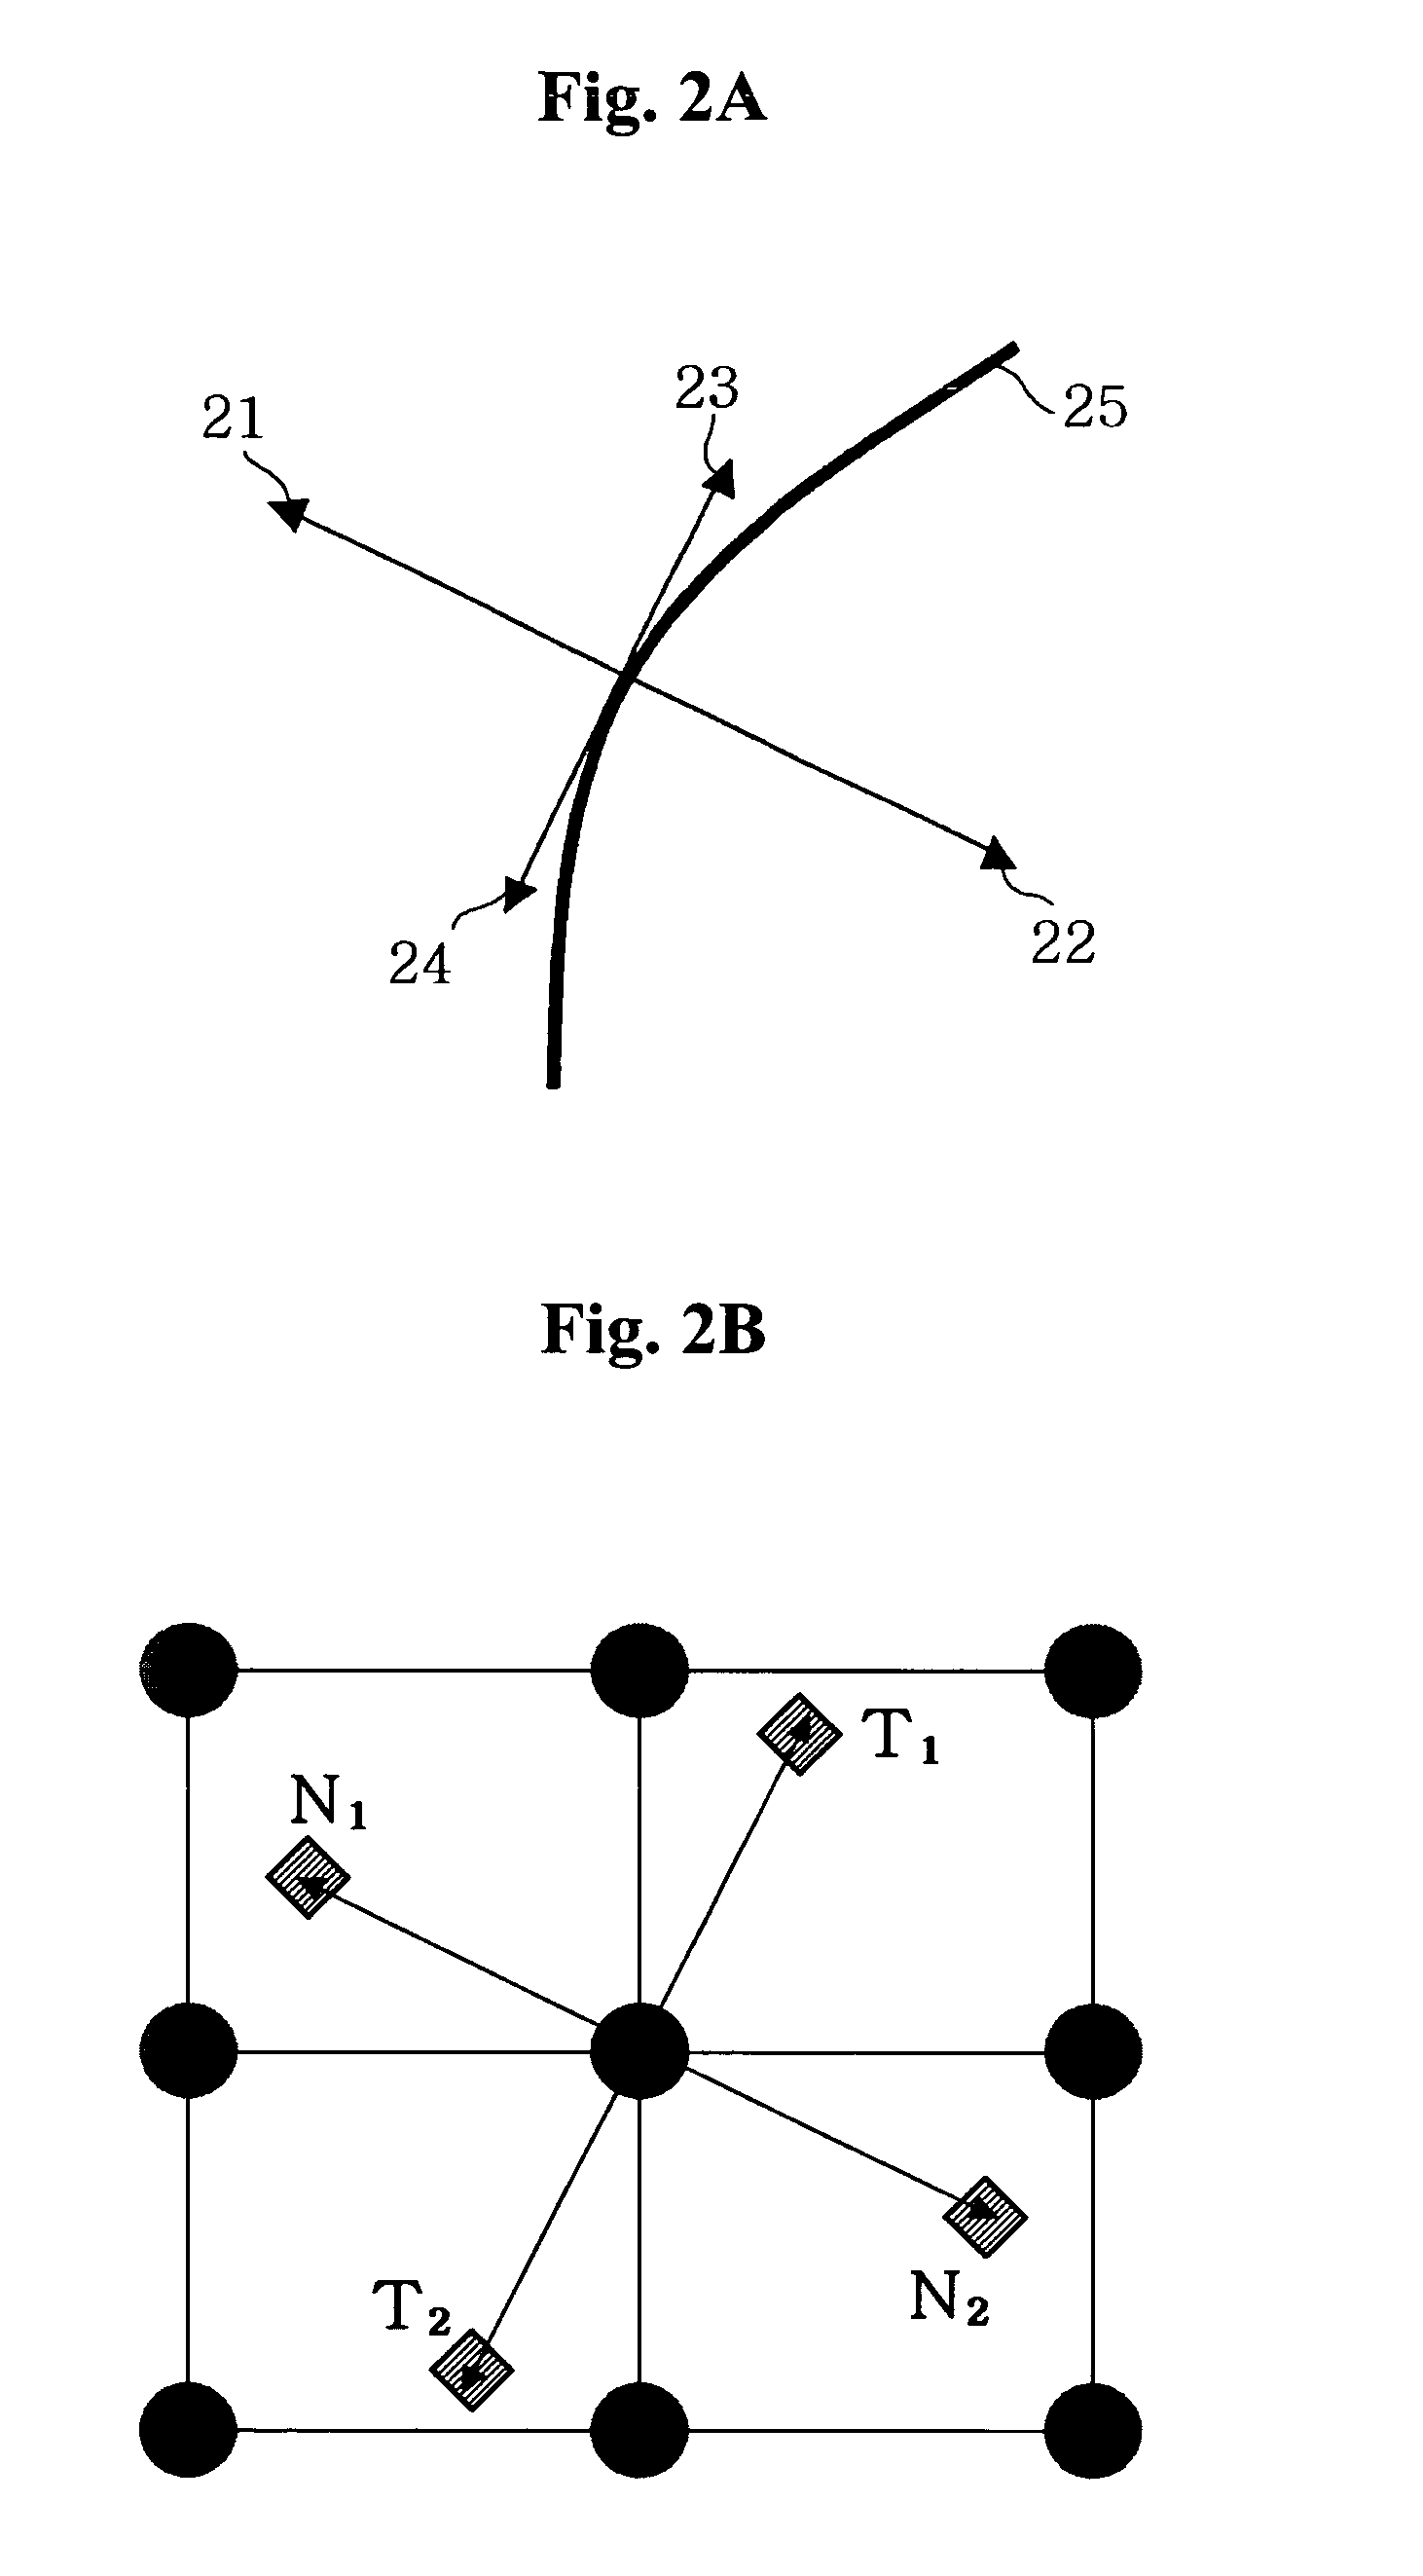 Method and apparatus for enhancing image quality of a two-dimensional ultrasound image